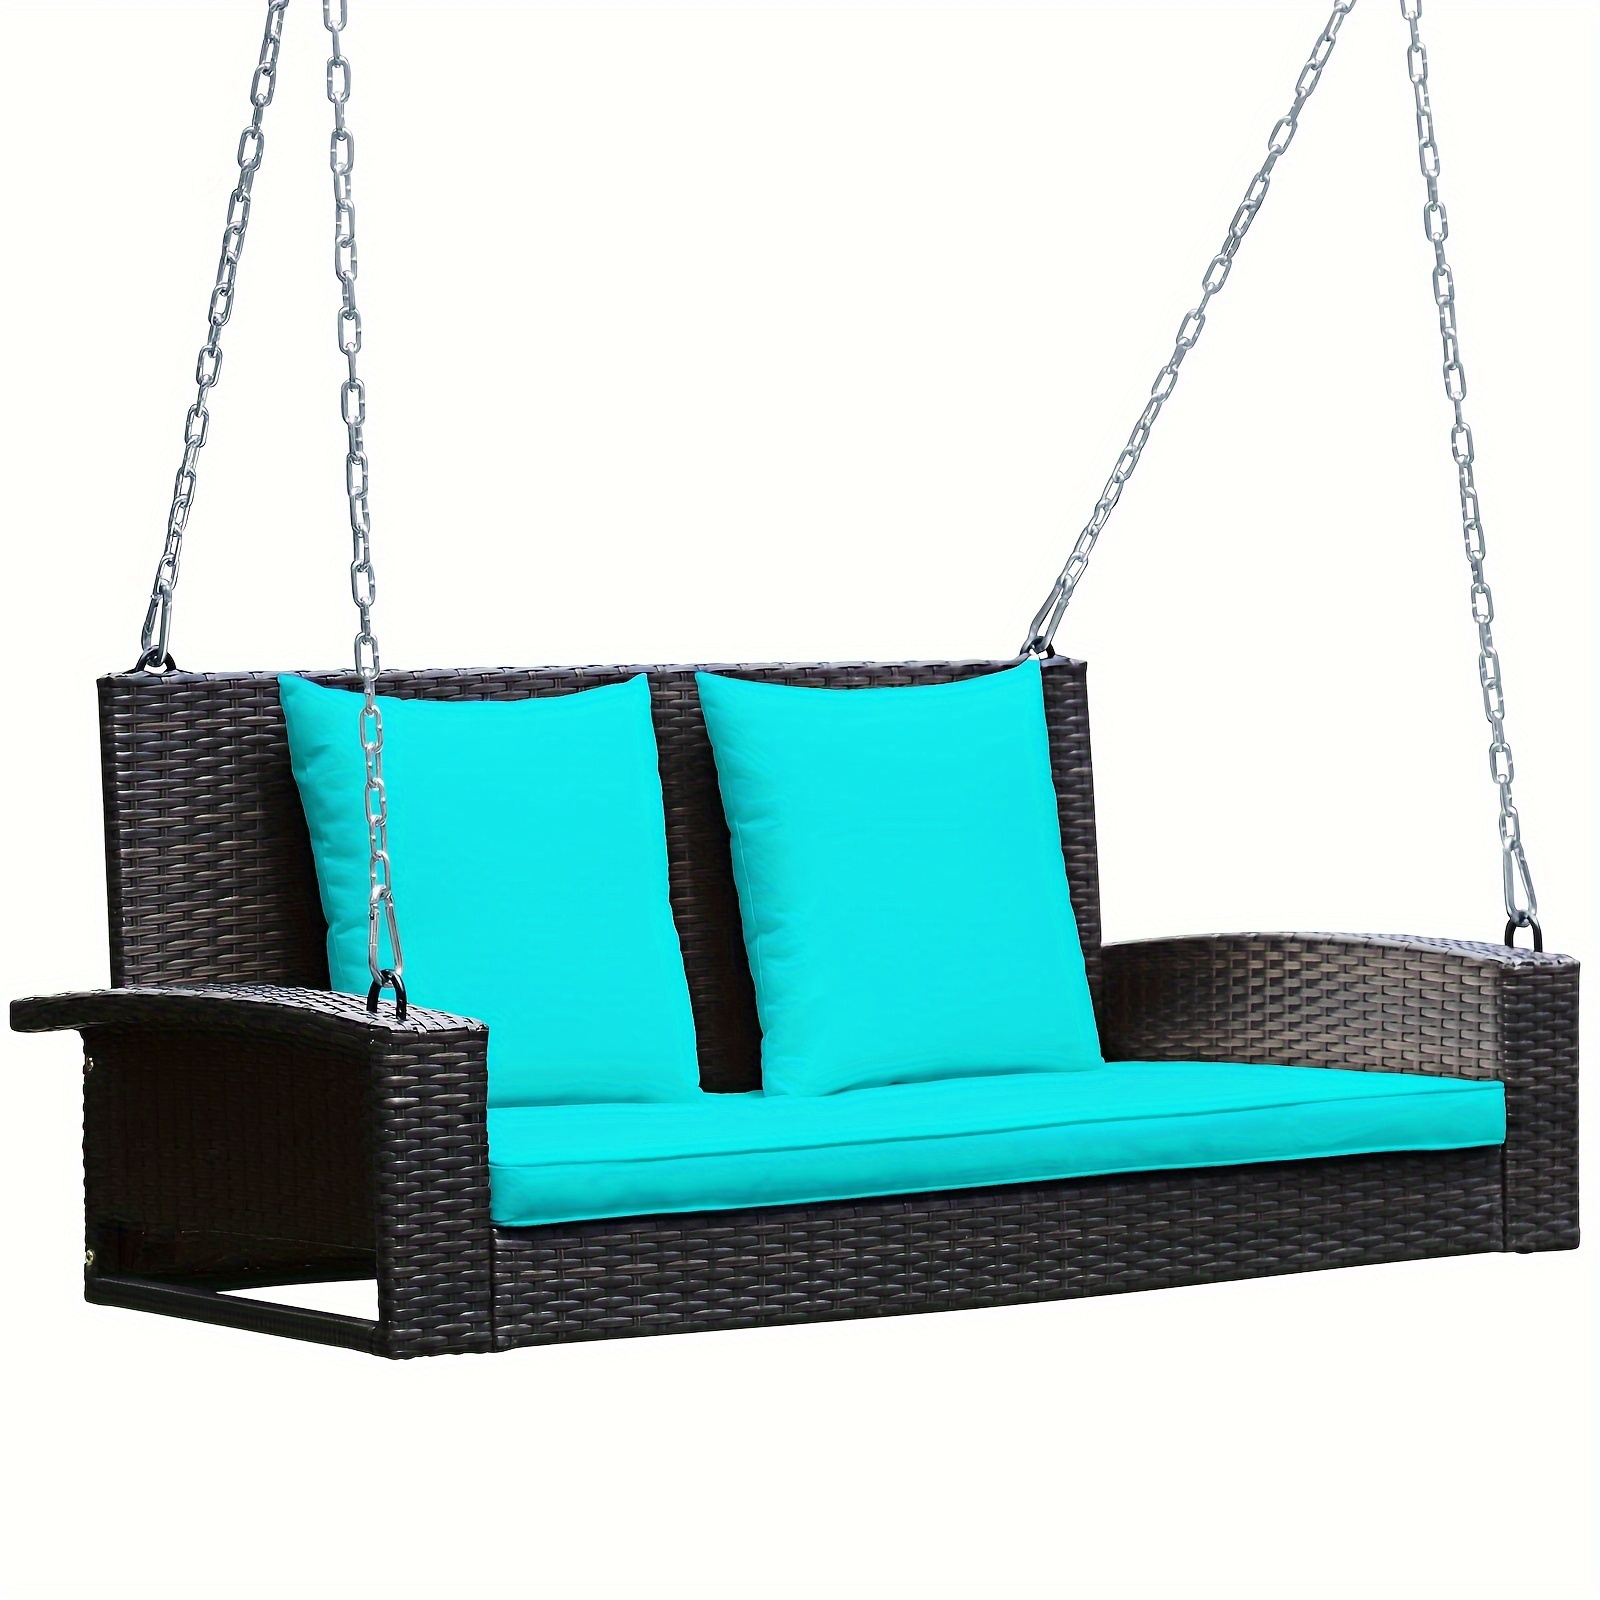 

2-person Patio Rattan Hanging Porch Swing Bench Chair Cushion Turquoise